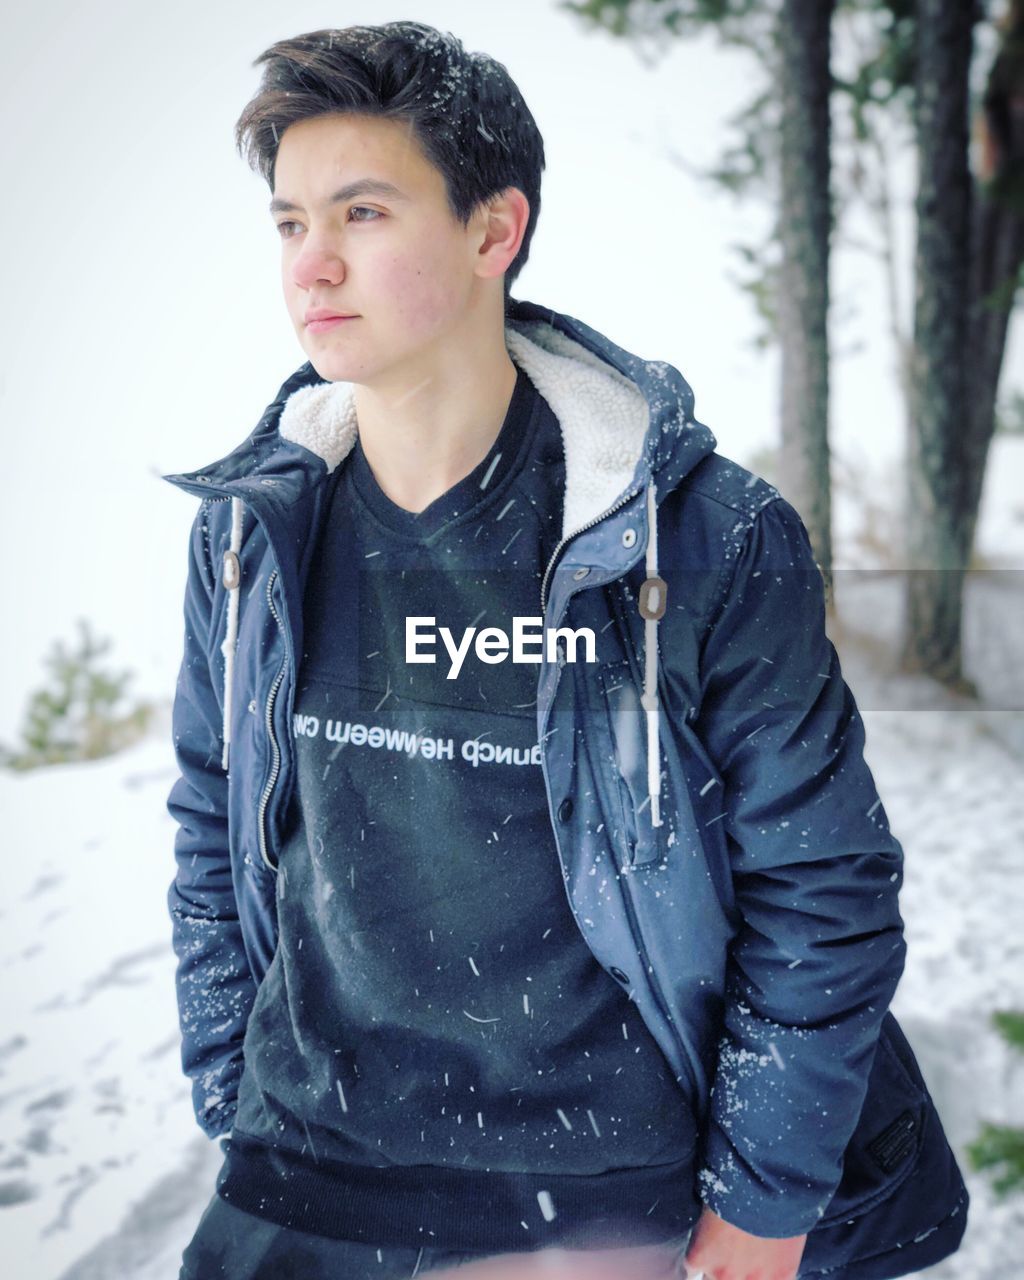 YOUNG MAN STANDING ON SNOW